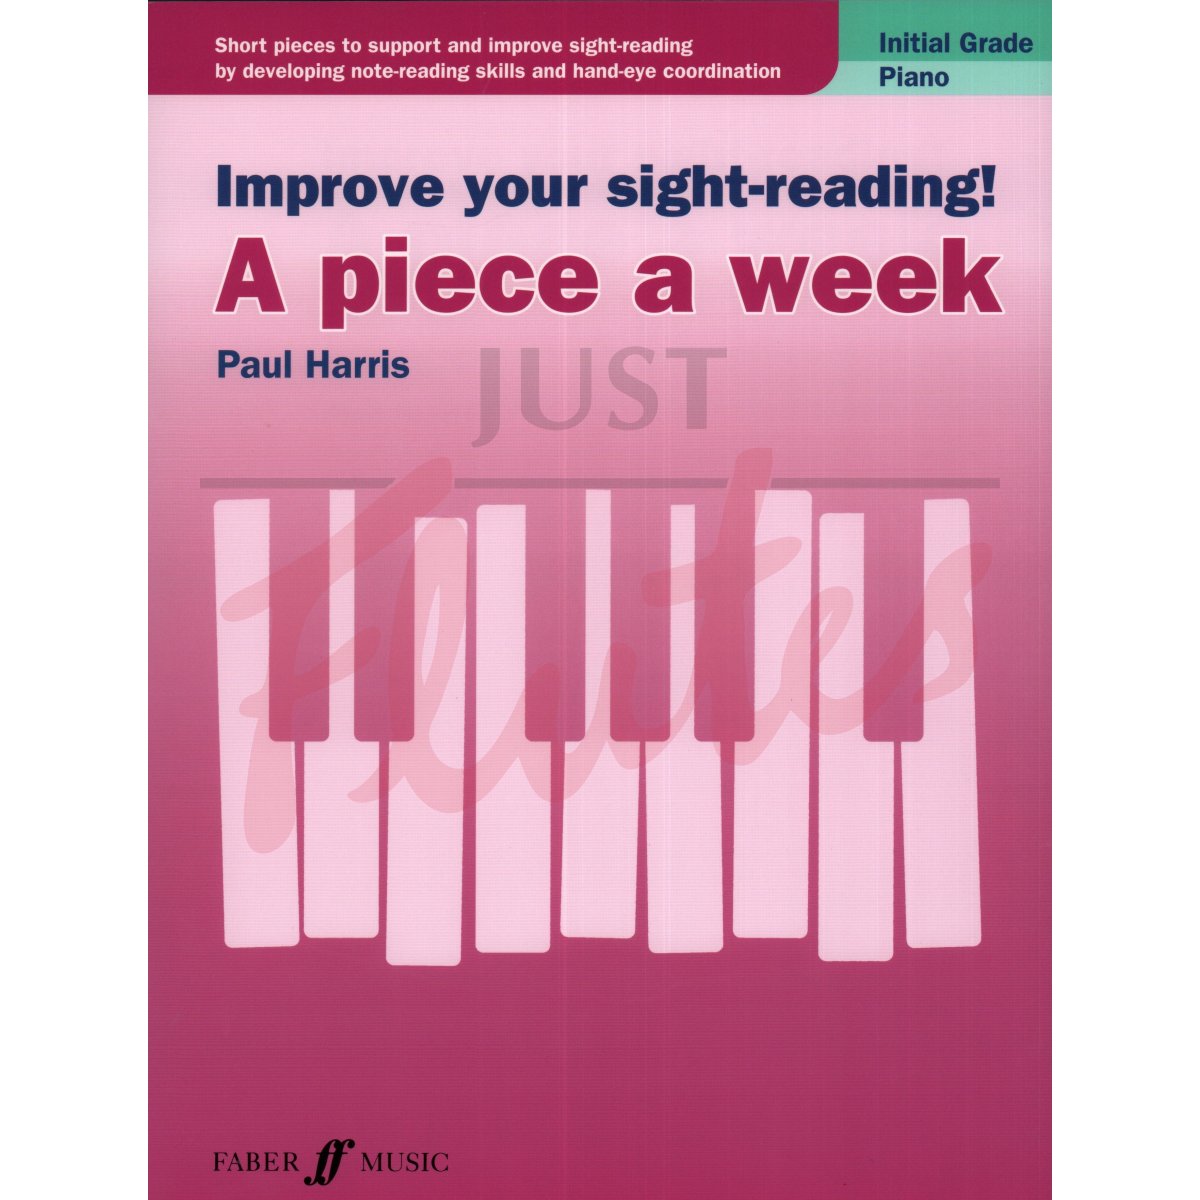 Improve your Sight-Reading! A Piece a Week Piano Initial Grade